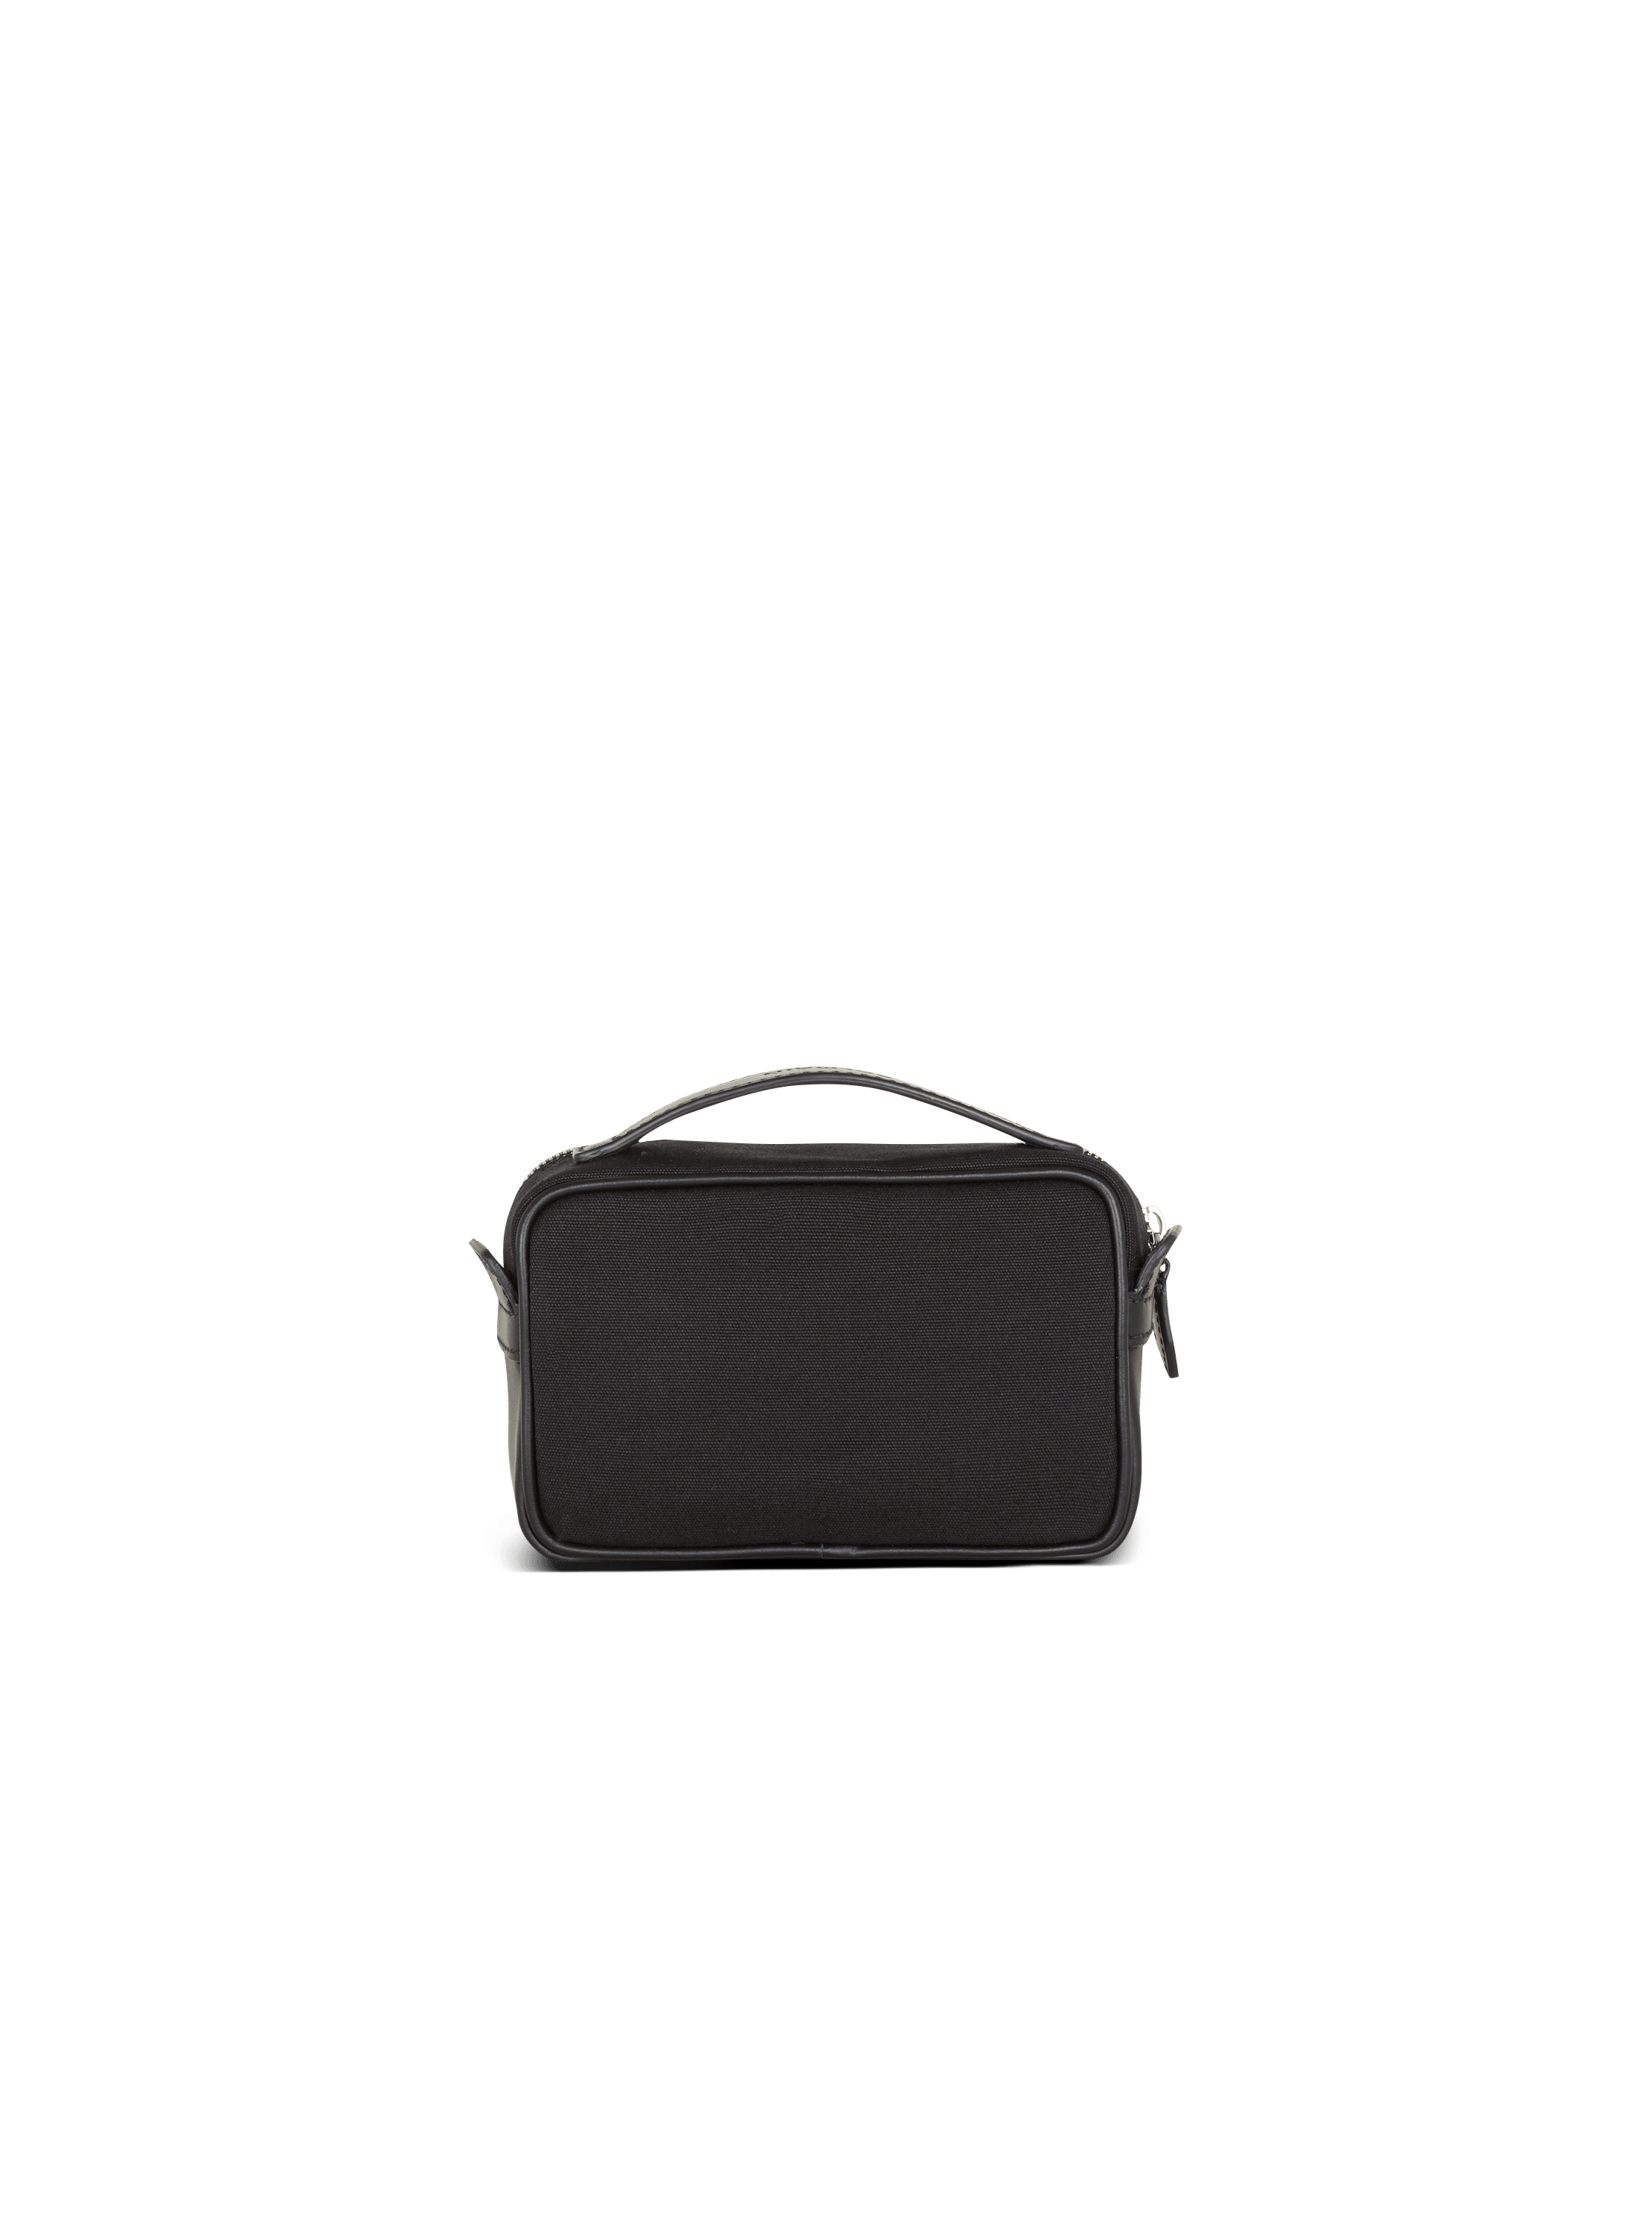 Balmain - Mini Reporter Bag in Canvas and Leather